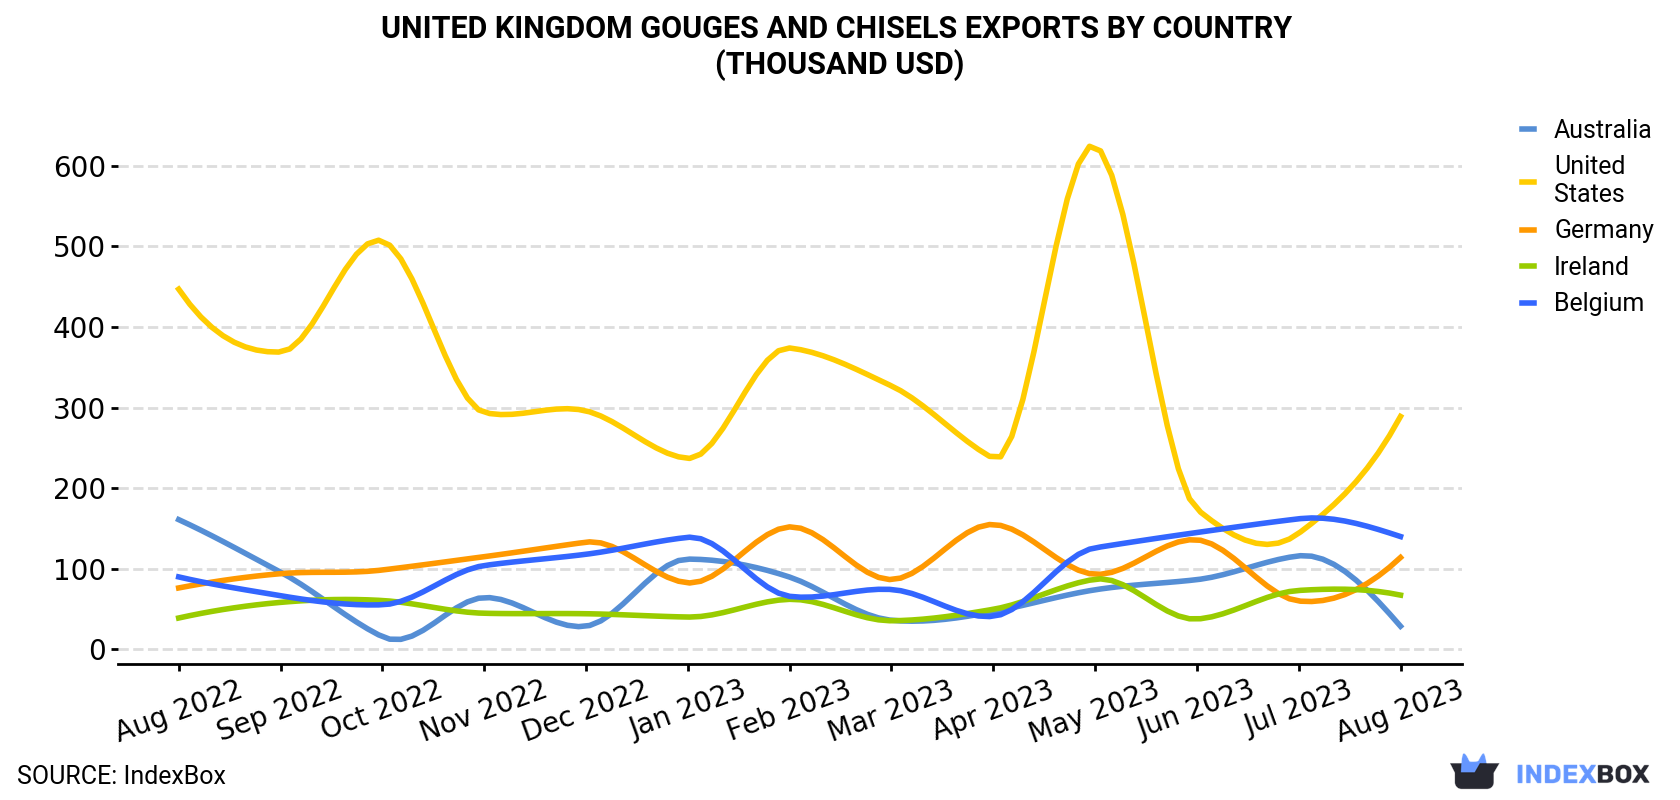 United Kingdom Gouges And Chisels Exports By Country (Thousand USD)